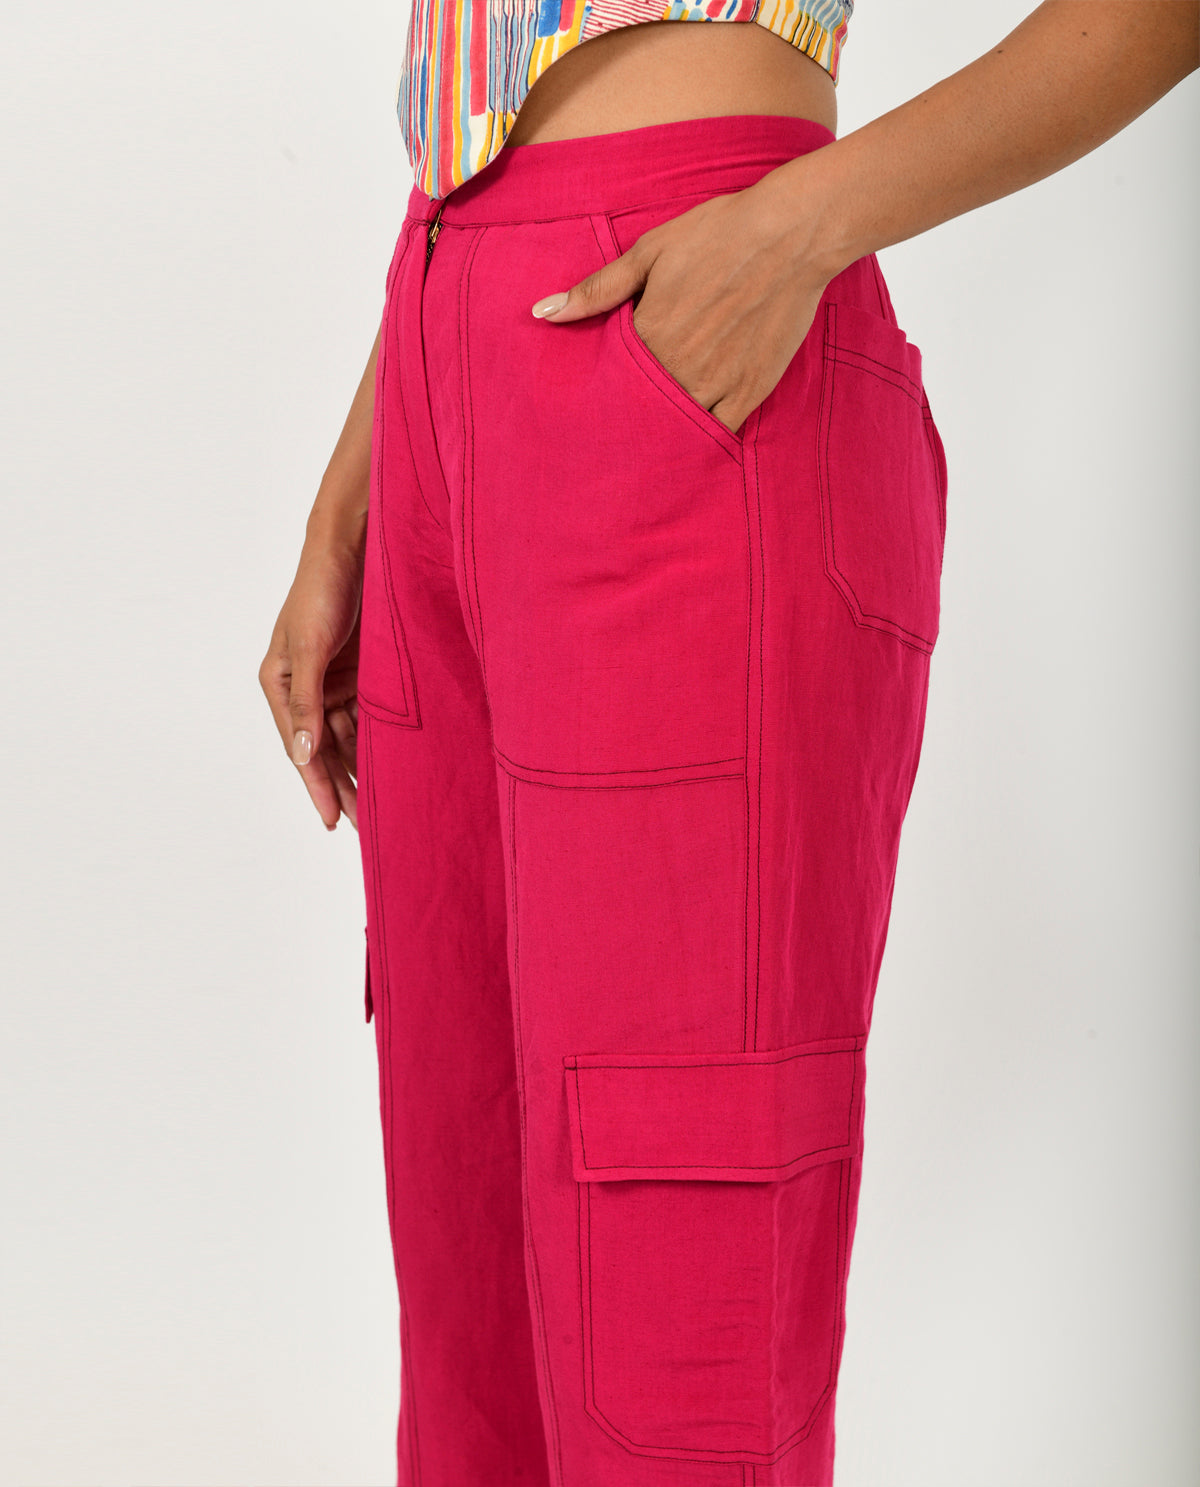 Pink Pants by Rias Jaipur with Casual Wear, Linen Blend, Natural, Pants, Pink, Relaxed Fit, Solids, Womenswear, Yaadein, Yaadein by Rias Jaipur at Kamakhyaa for sustainable fashion